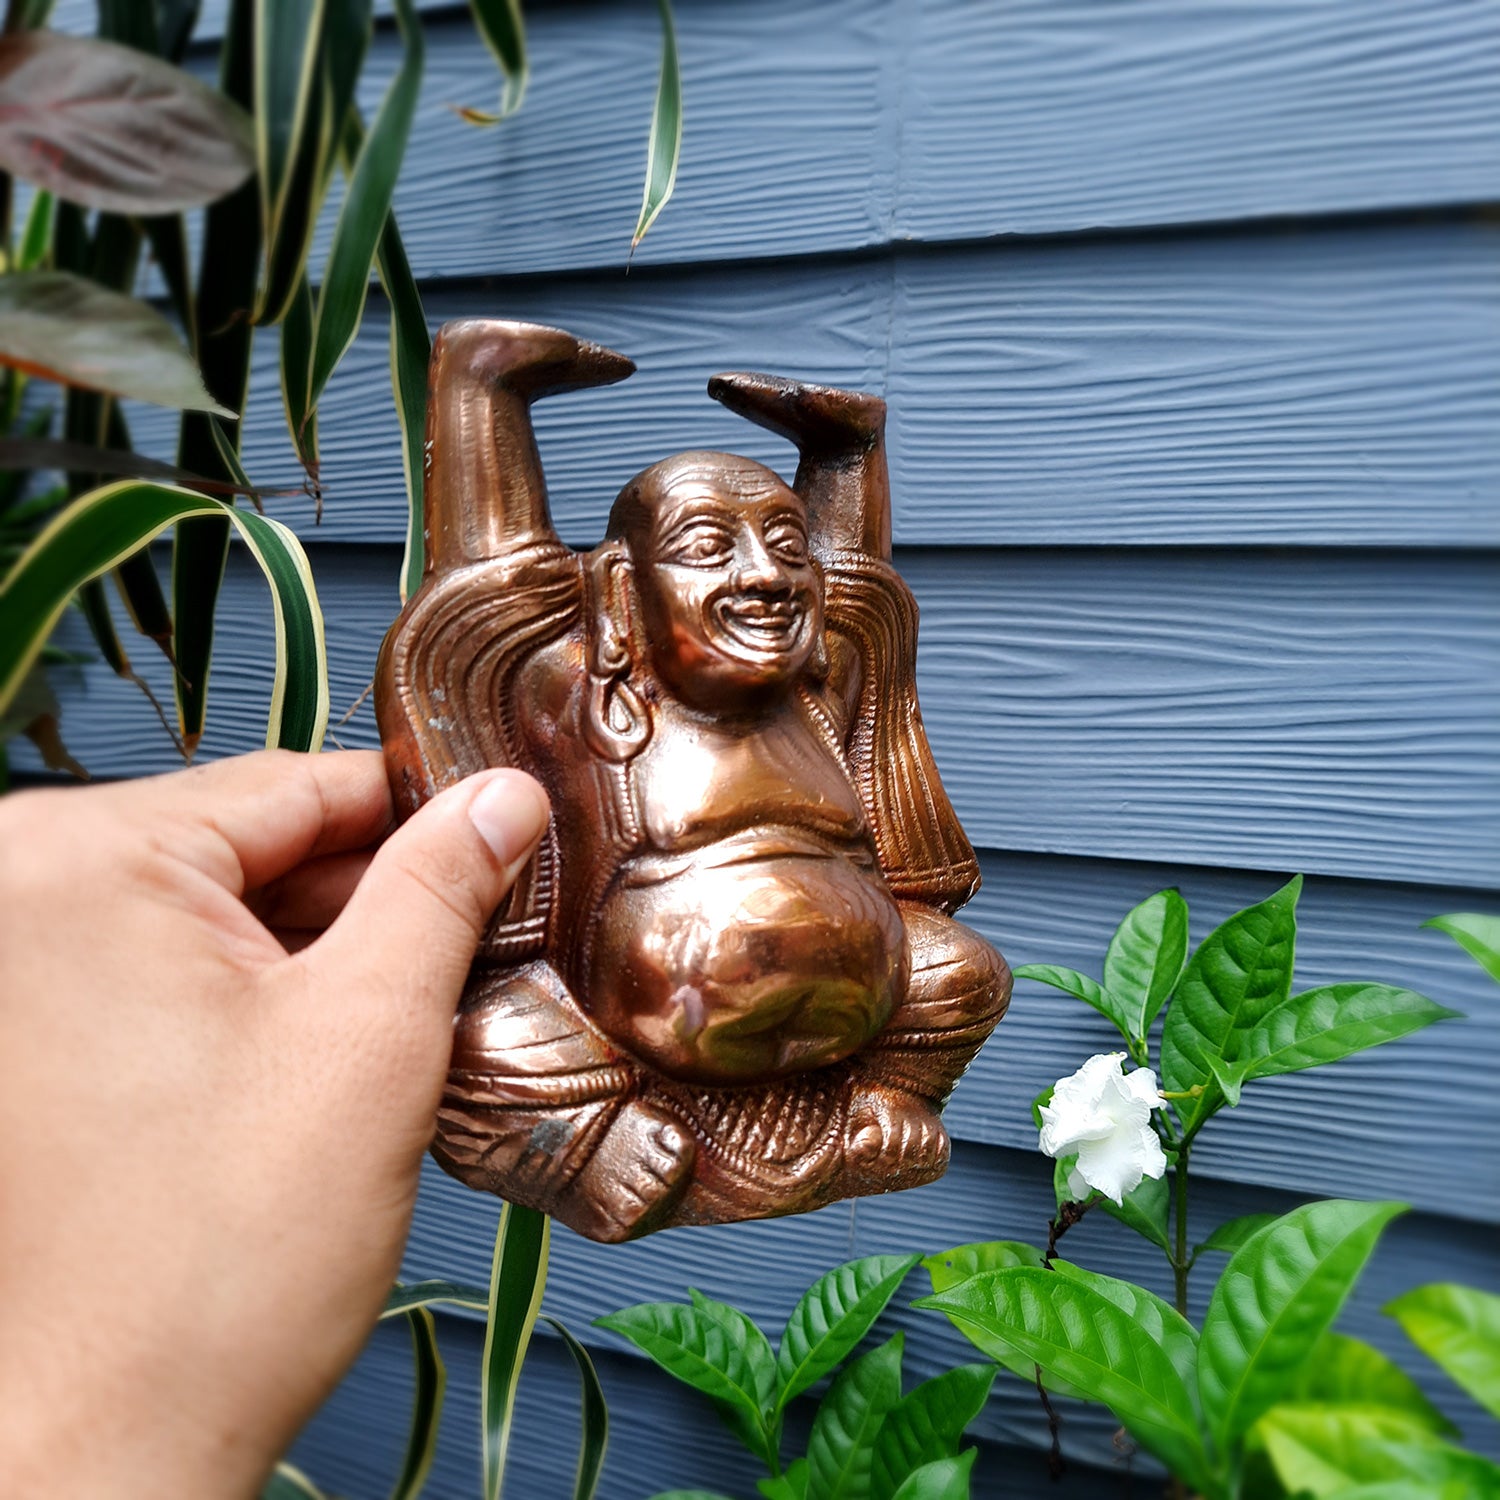 Laughing Buddha Showpiece For Good Luck | Laughing Buddha for Happiness, Positivity, Home Decor & Gift - 7 inch